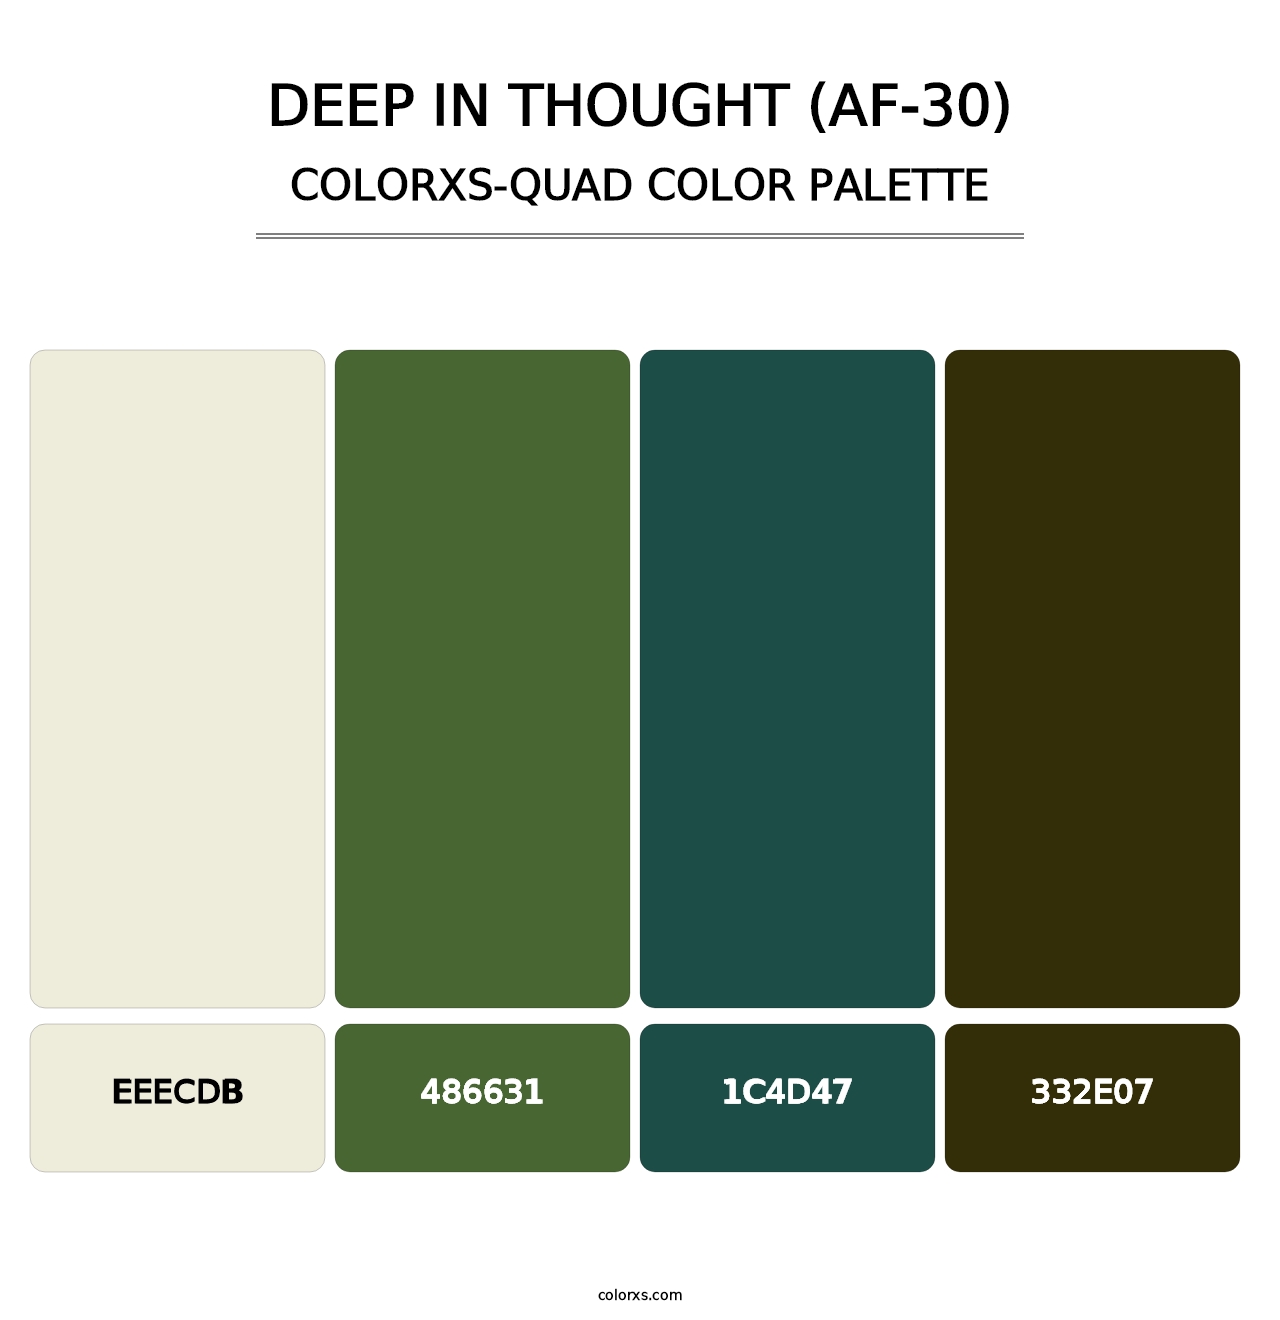 Deep in Thought (AF-30) - Colorxs Quad Palette